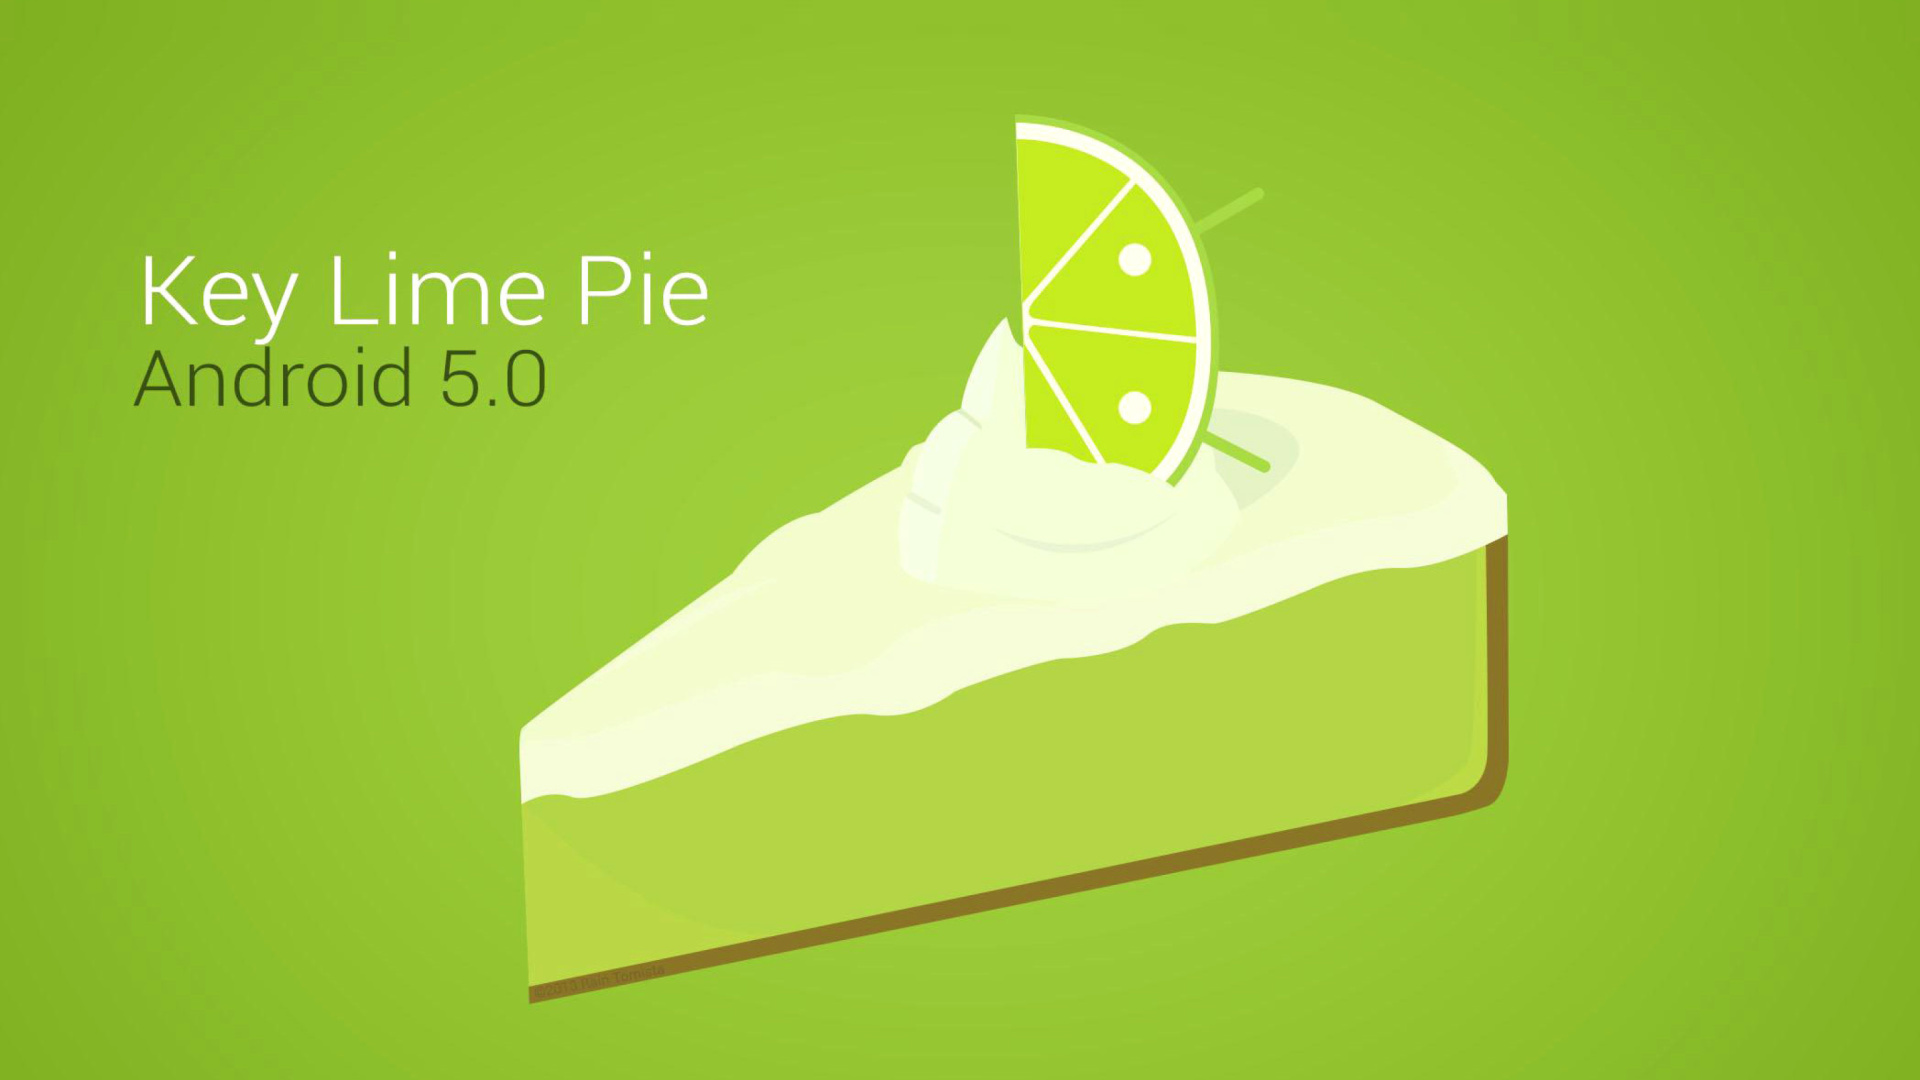 Concept Android 5.0 Key Lime Pie screenshot #1 1920x1080